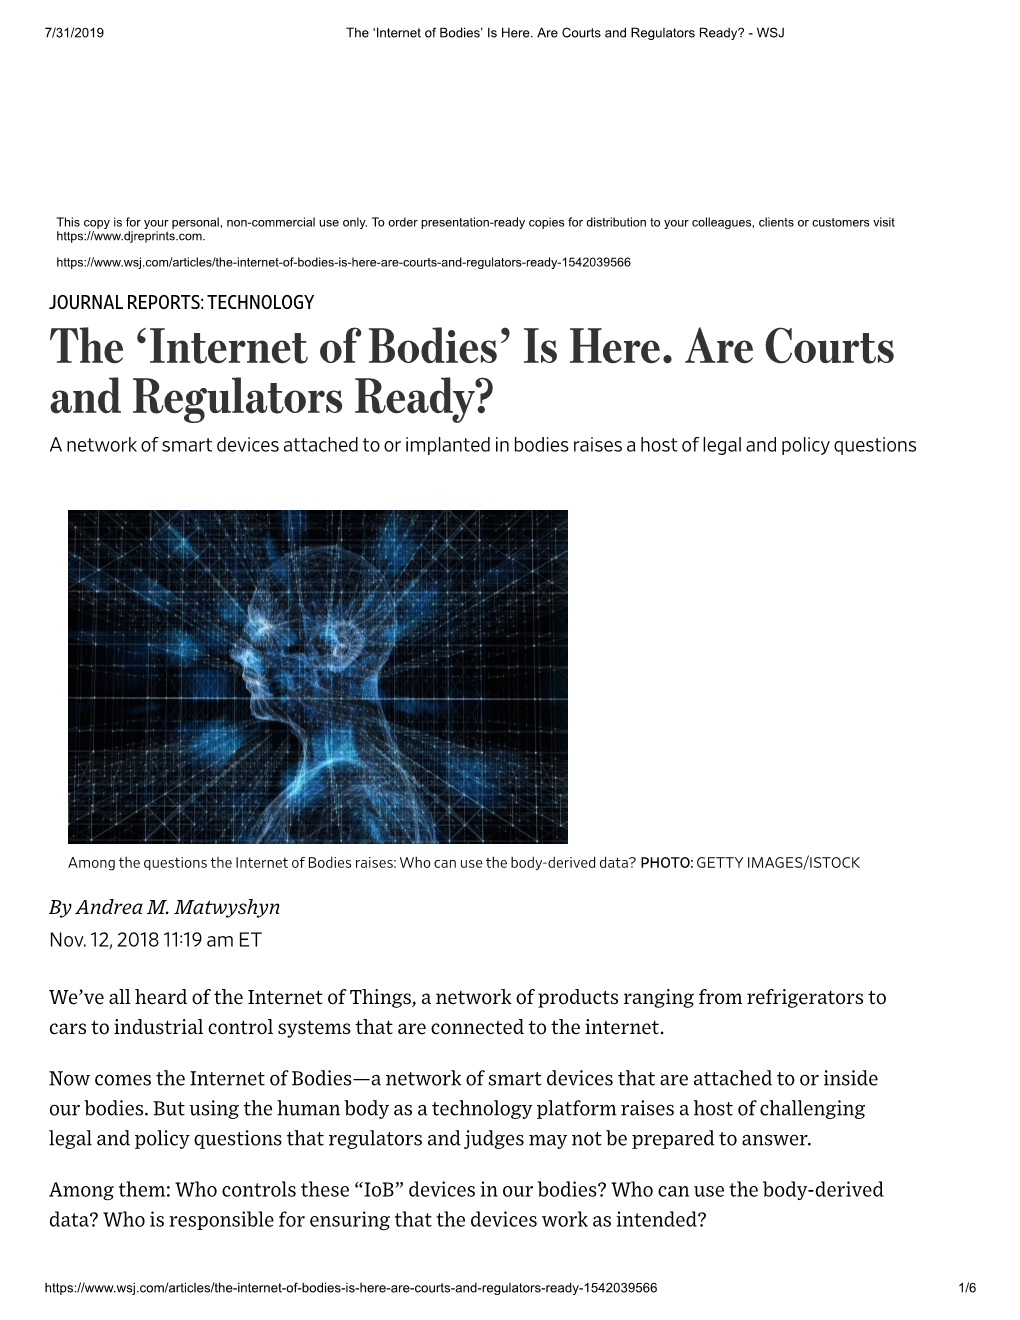 The 'Internet of Bodies' Is Here. Are Courts and Regulators Ready?